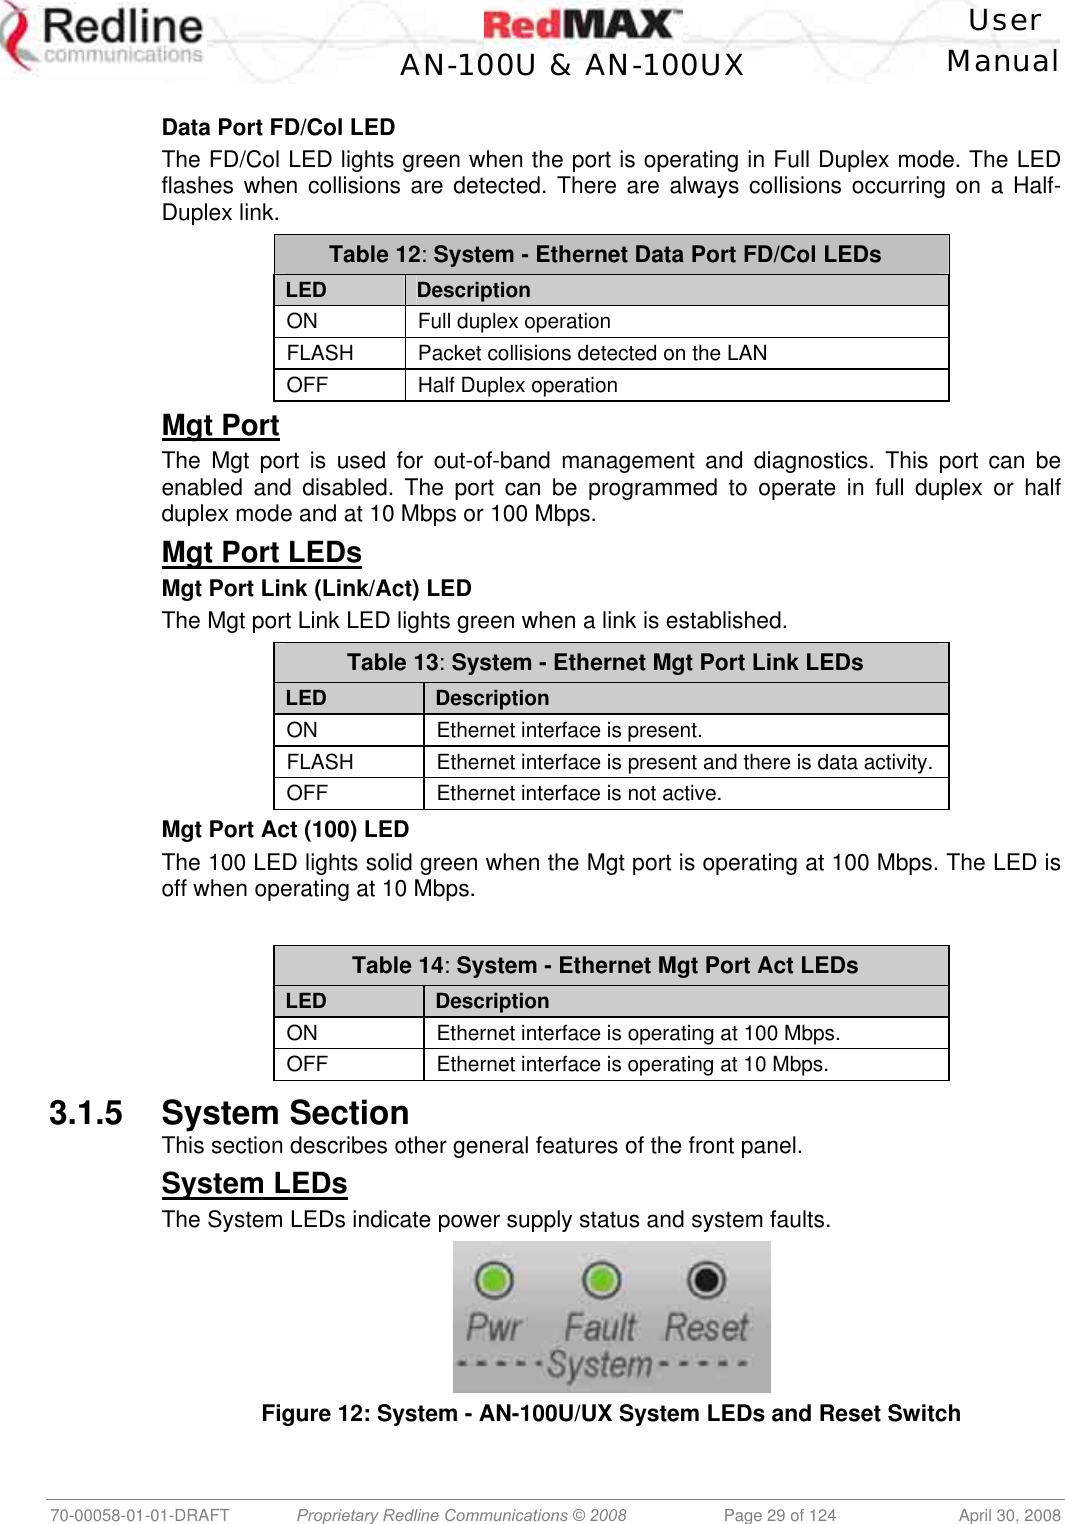    User  AN-100U &amp; AN-100UX Manual   70-00058-01-01-DRAFT  Proprietary Redline Communications © 2008   Page 29 of 124  April 30, 2008  Data Port FD/Col LED The FD/Col LED lights green when the port is operating in Full Duplex mode. The LED flashes when collisions are detected. There are always collisions occurring on a Half-Duplex link. Table 12: System - Ethernet Data Port FD/Col LEDs LED  Description ON  Full duplex operation FLASH  Packet collisions detected on the LAN OFF  Half Duplex operation Mgt Port The Mgt port is used for out-of-band management and diagnostics. This port can be enabled and disabled. The port can be programmed to operate in full duplex or half duplex mode and at 10 Mbps or 100 Mbps. Mgt Port LEDs Mgt Port Link (Link/Act) LED The Mgt port Link LED lights green when a link is established. Table 13: System - Ethernet Mgt Port Link LEDs LED  Description ON  Ethernet interface is present. FLASH  Ethernet interface is present and there is data activity. OFF  Ethernet interface is not active. Mgt Port Act (100) LED The 100 LED lights solid green when the Mgt port is operating at 100 Mbps. The LED is off when operating at 10 Mbps.  Table 14: System - Ethernet Mgt Port Act LEDs LED  Description ON  Ethernet interface is operating at 100 Mbps. OFF  Ethernet interface is operating at 10 Mbps. 3.1.5 System Section This section describes other general features of the front panel. System LEDs The System LEDs indicate power supply status and system faults.  Figure 12: System - AN-100U/UX System LEDs and Reset Switch 